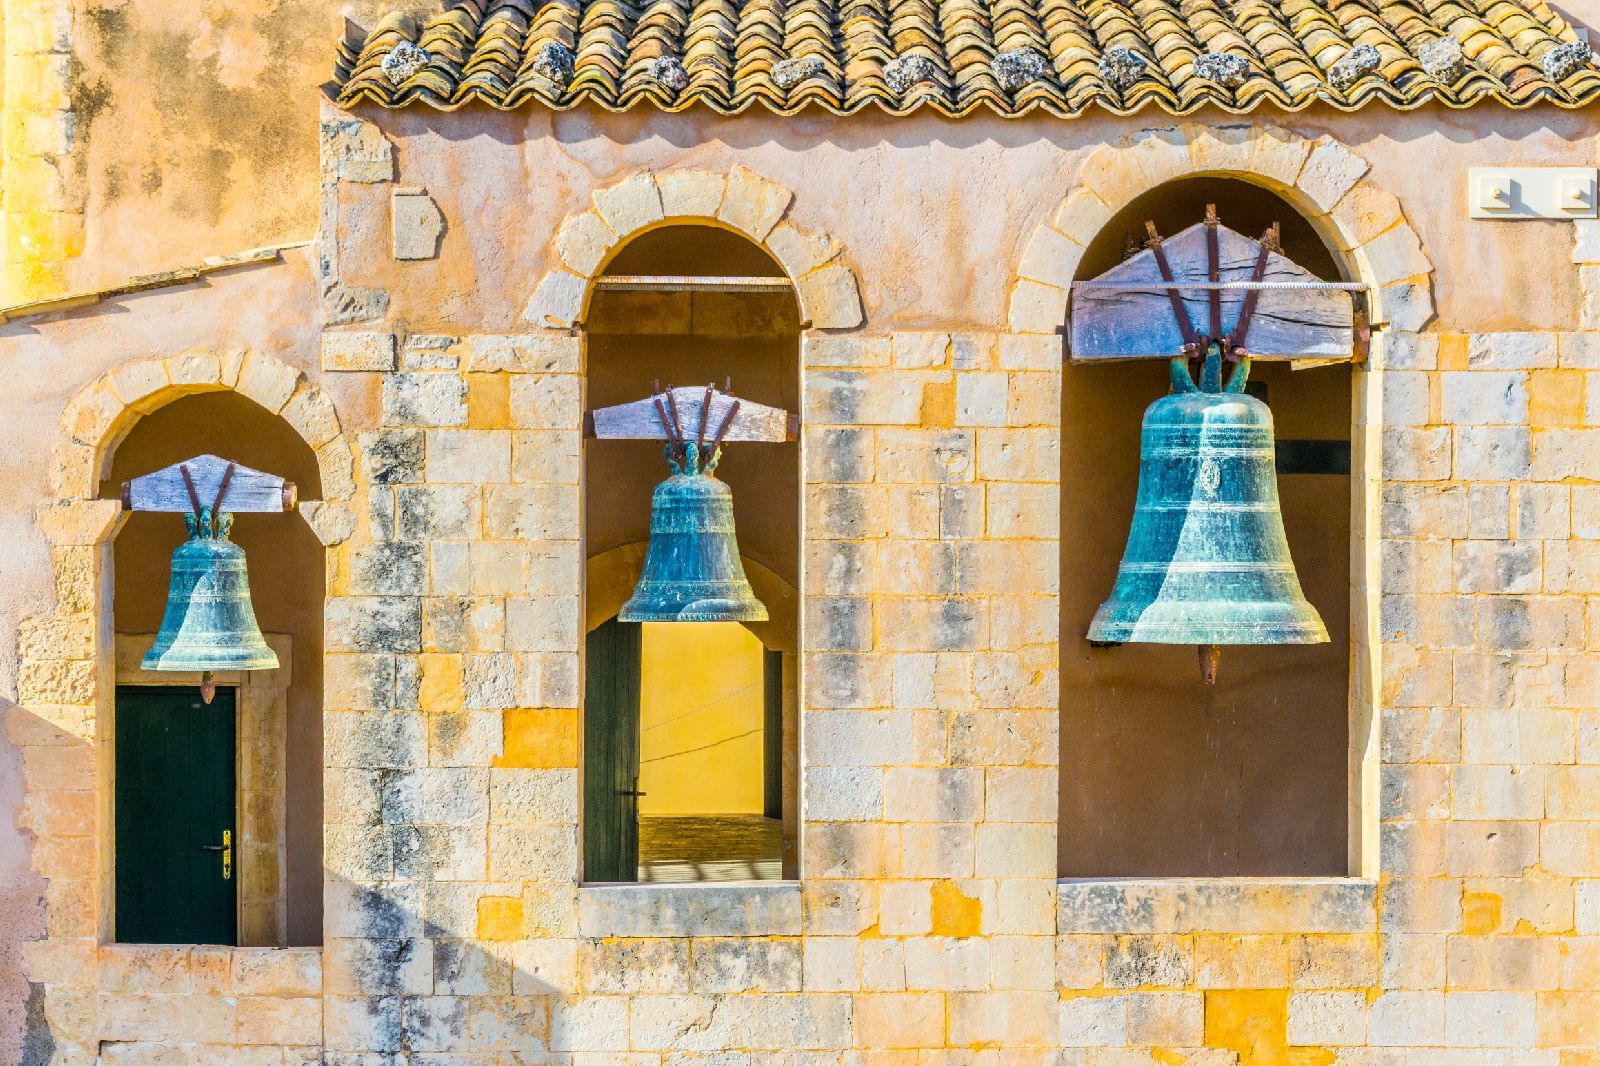 Close up of church bells in Noto Sicily